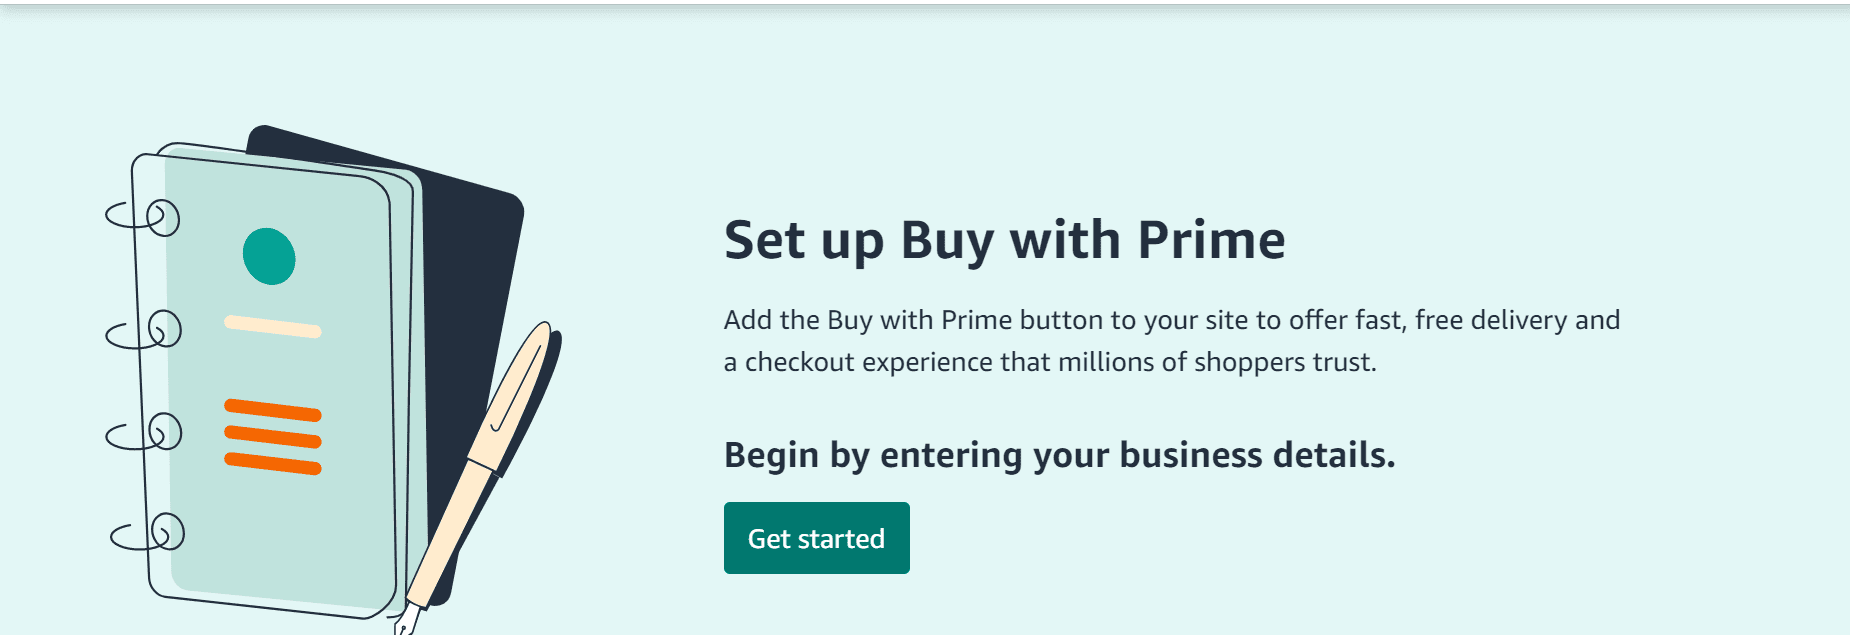 Set up Buy with Prime